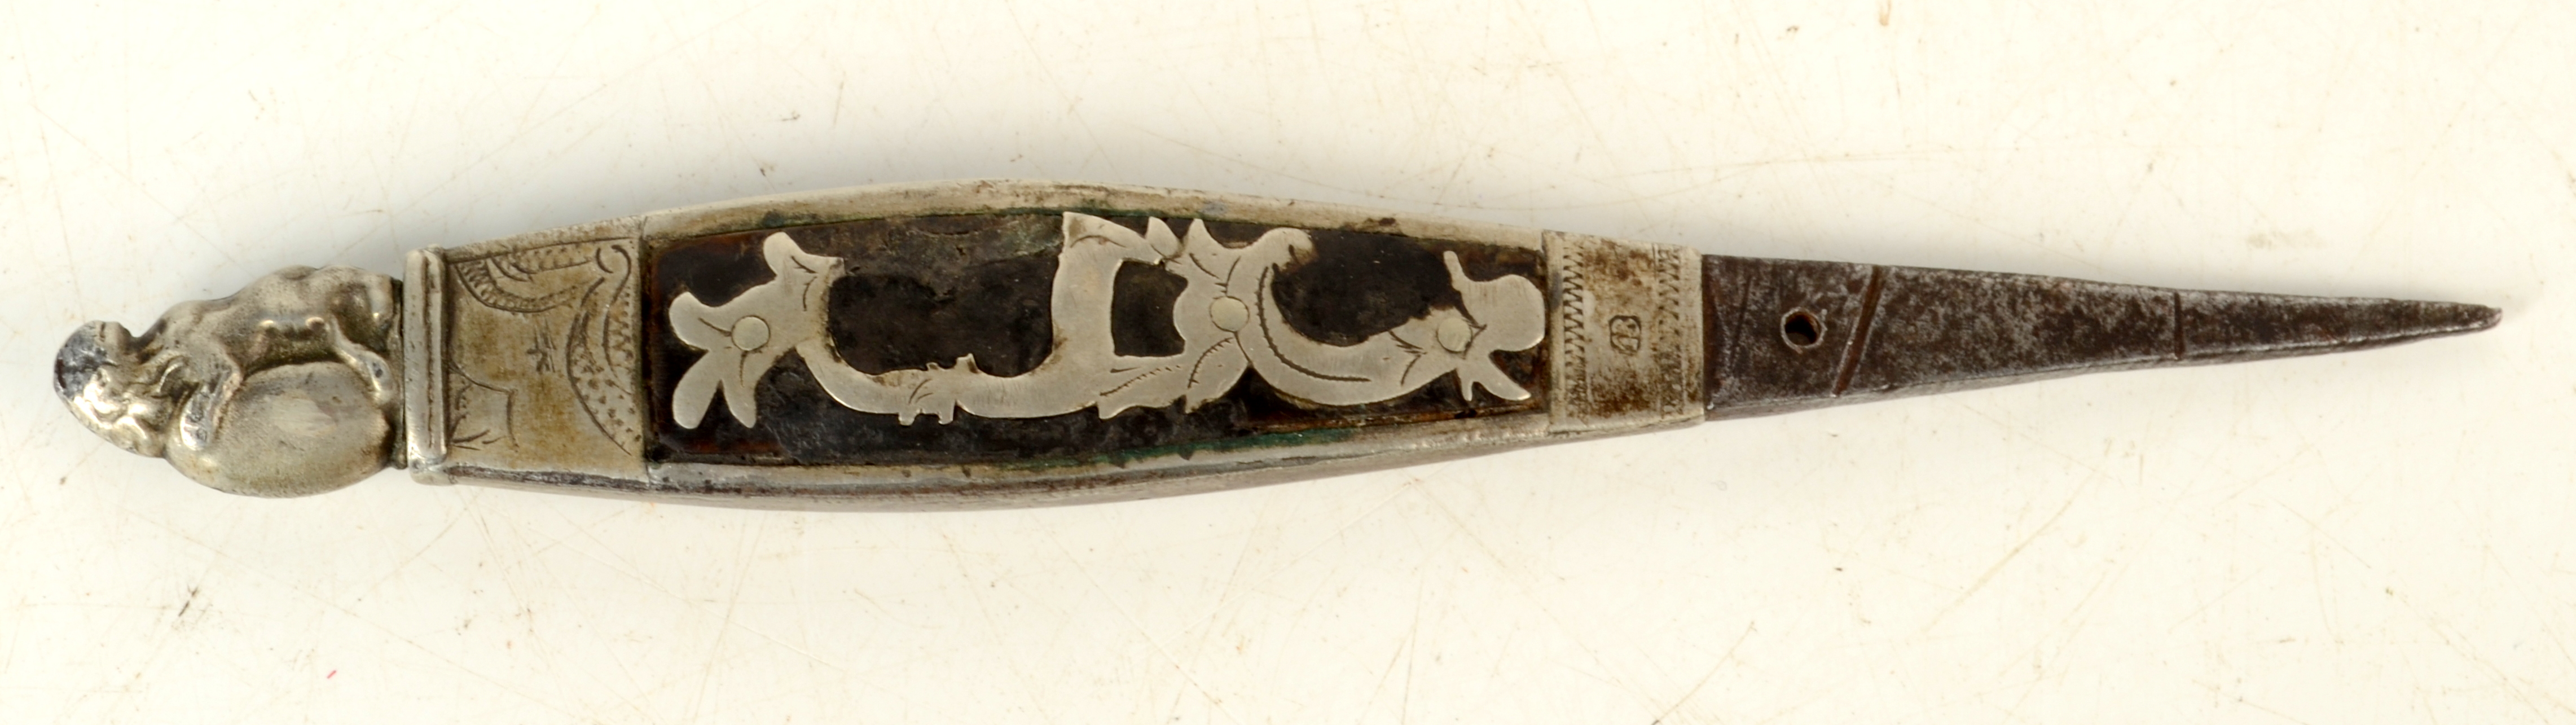 A 17th century marlin spike/sail needle, engraved JB, with a horn and white metal handle, length 13.